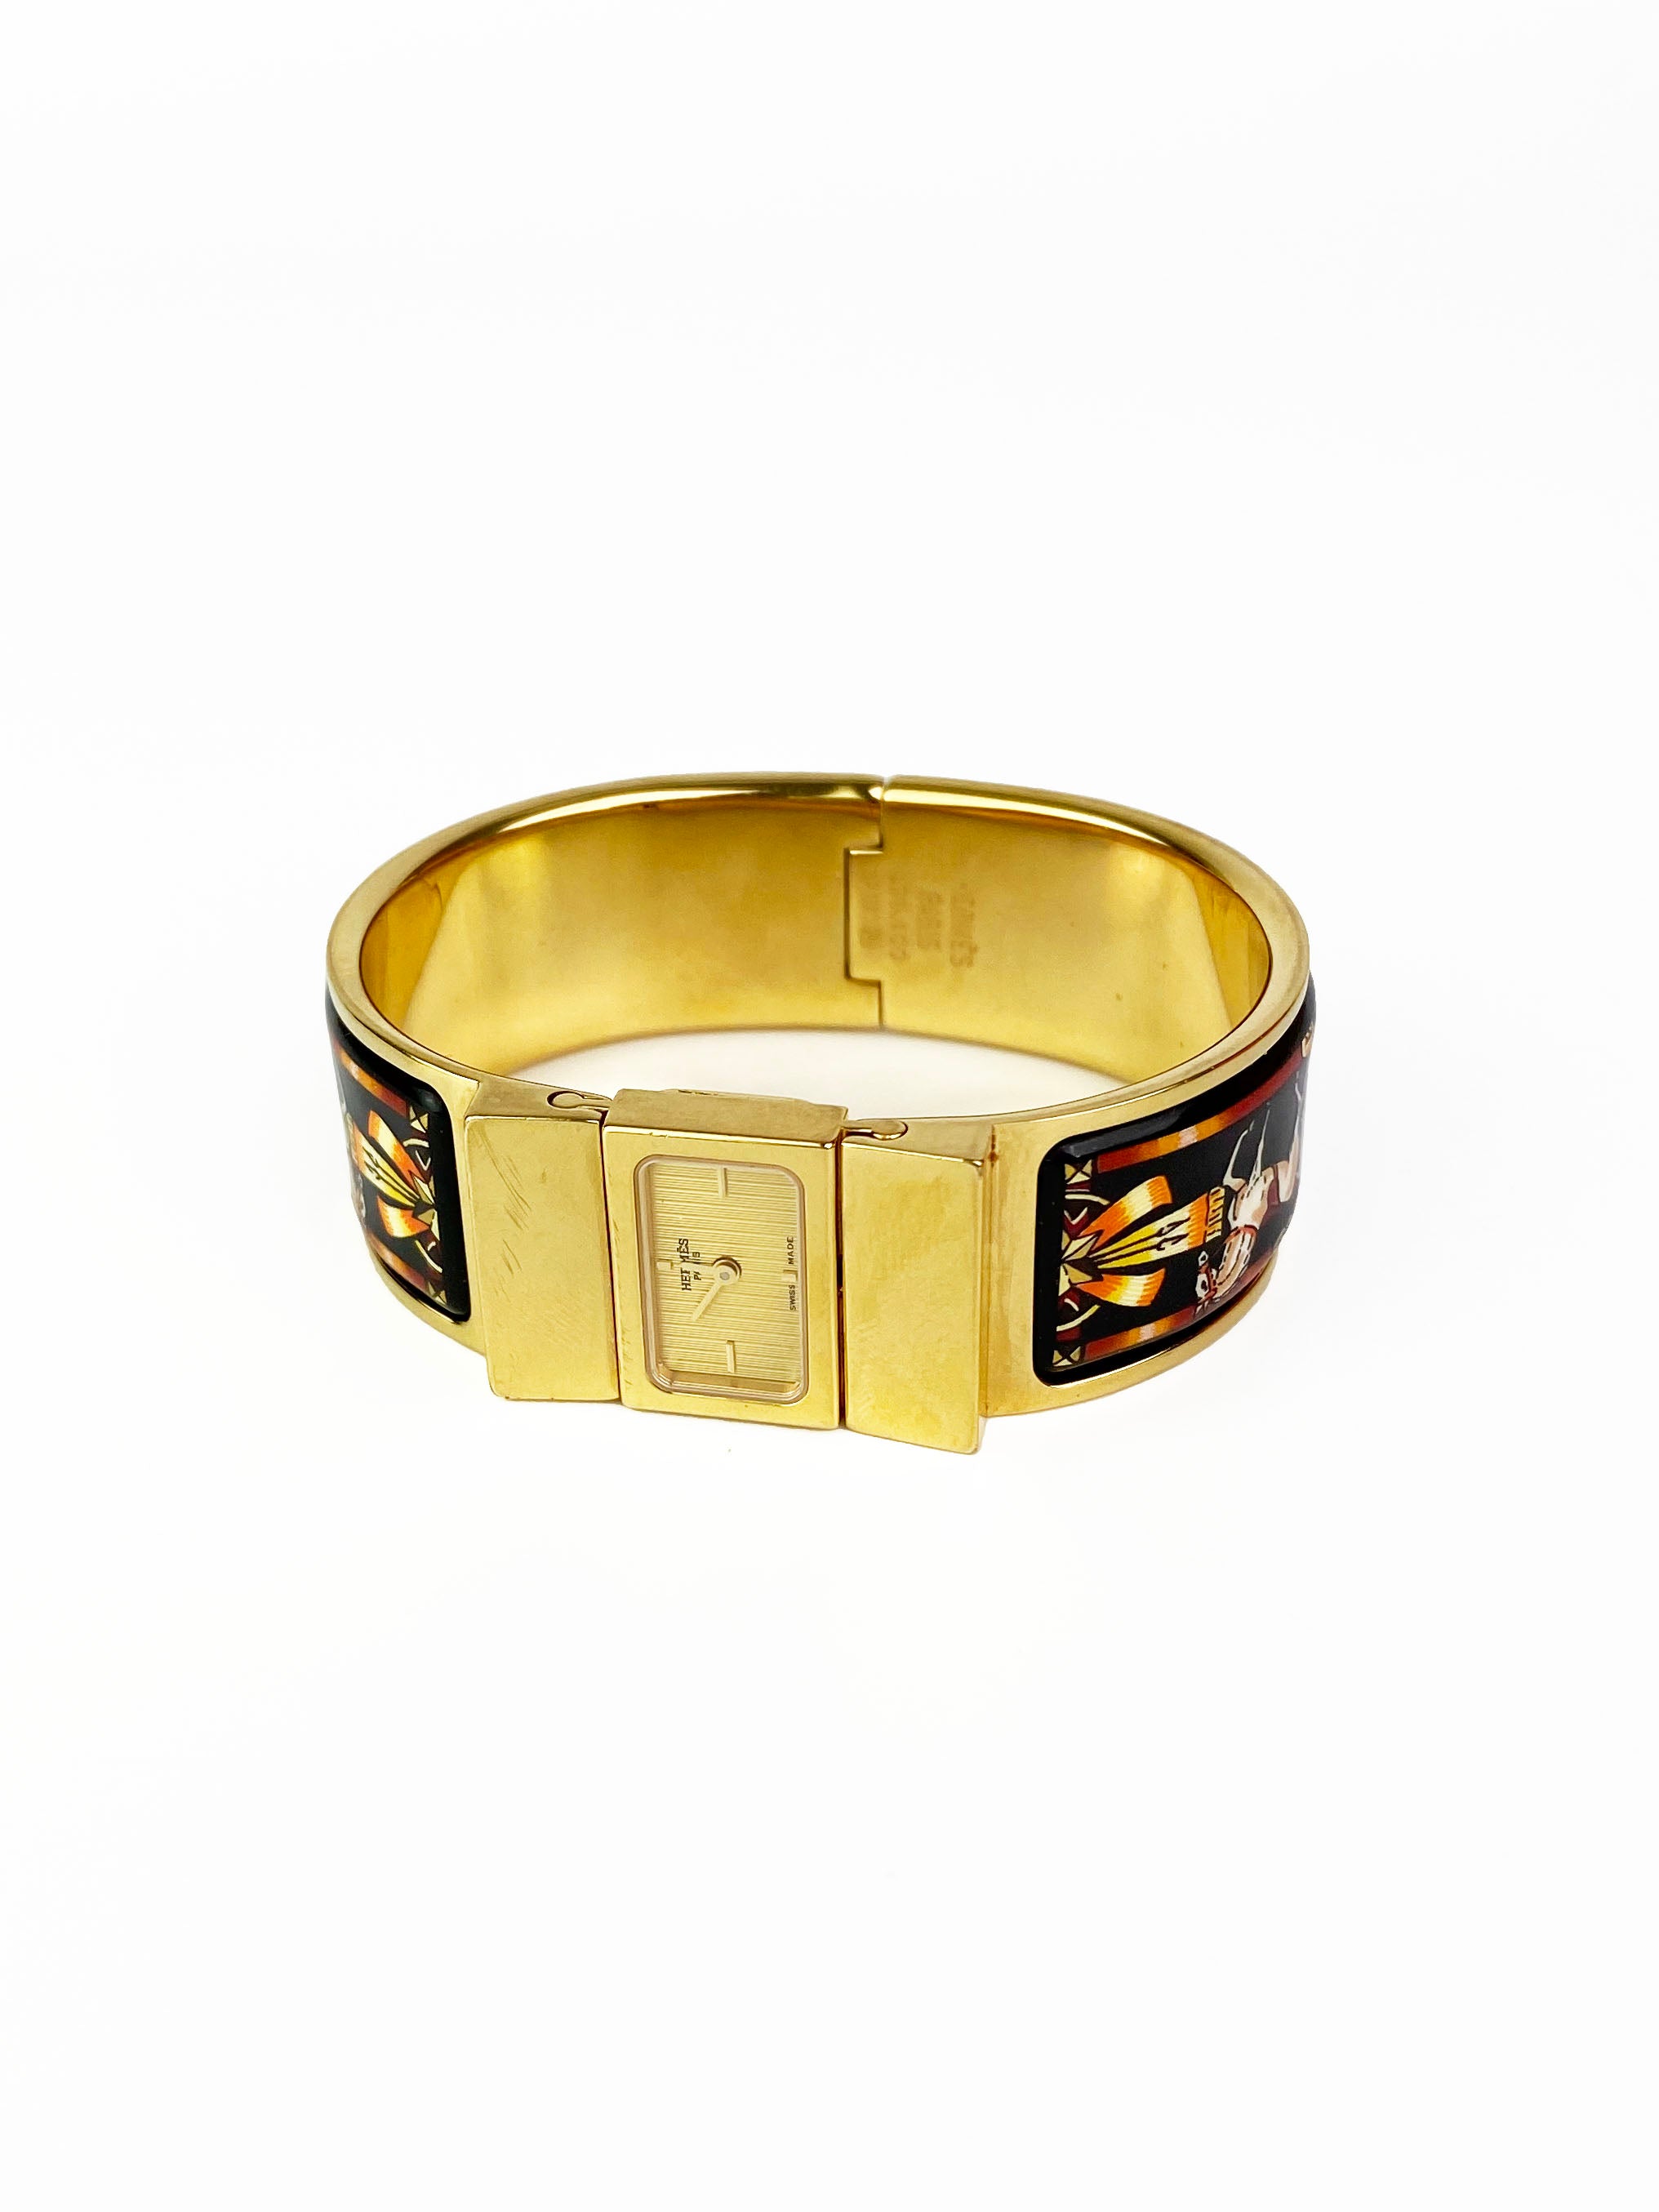 Hermes Gold Plated Loquet Bangle Watch